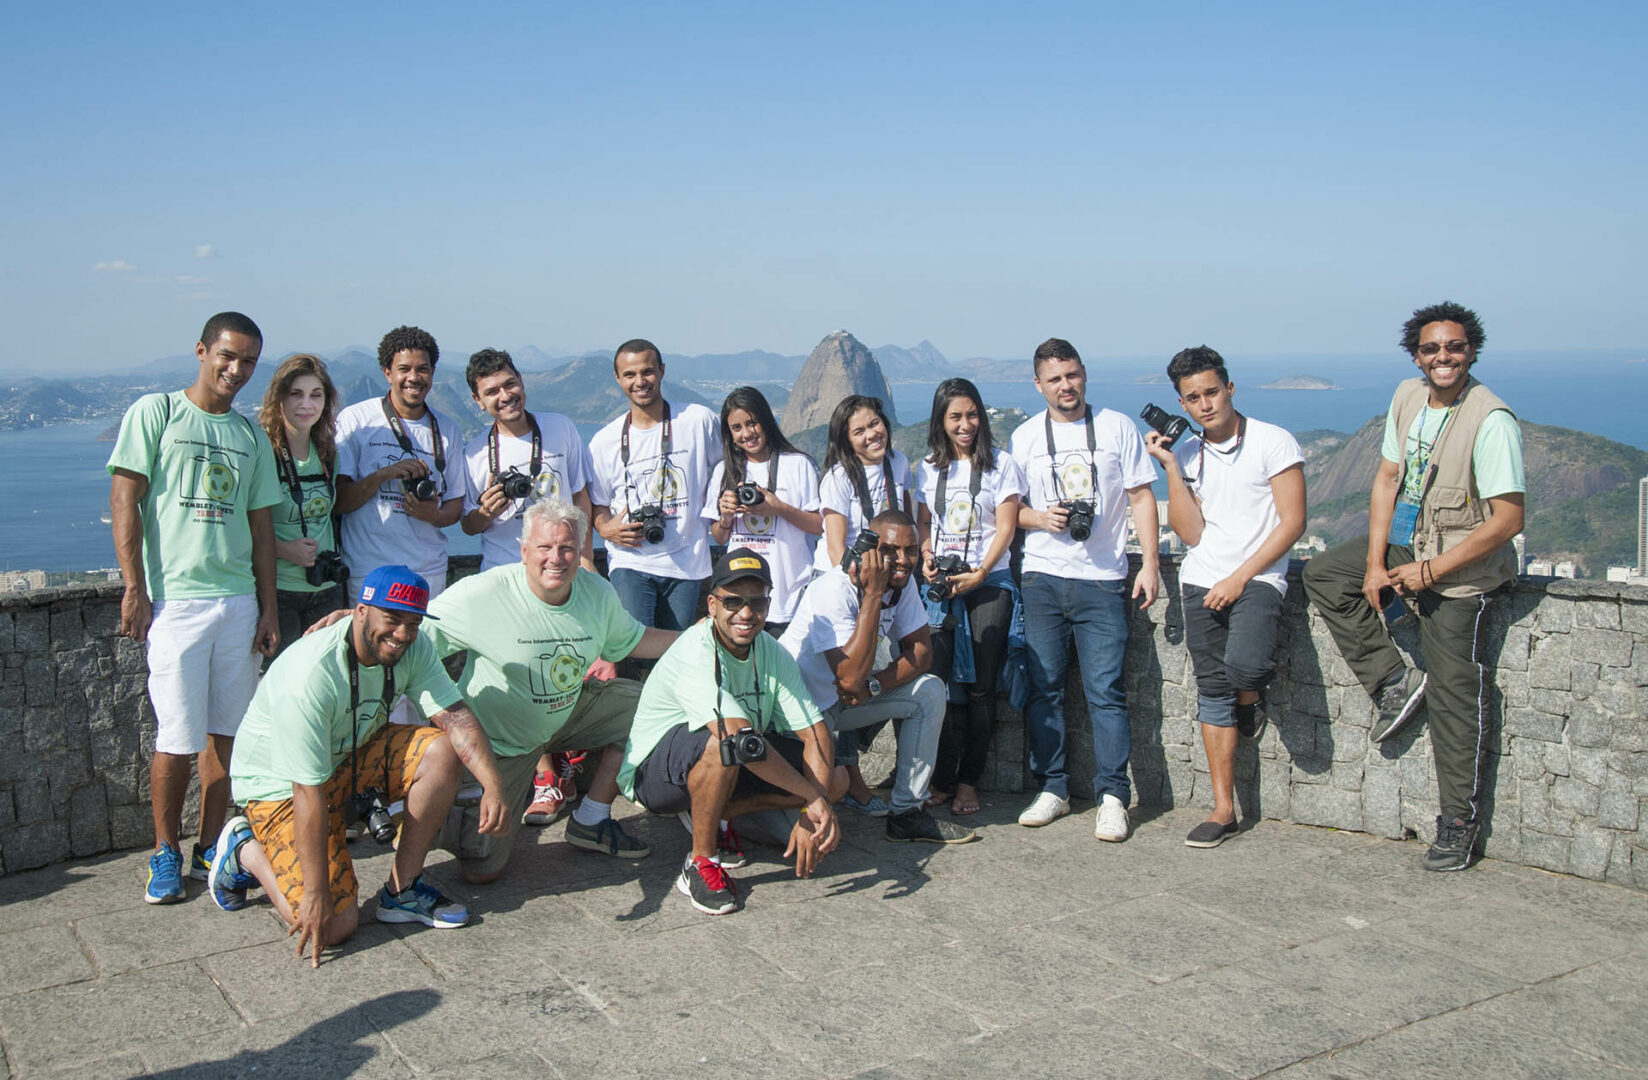 Our group of photographers in Rio